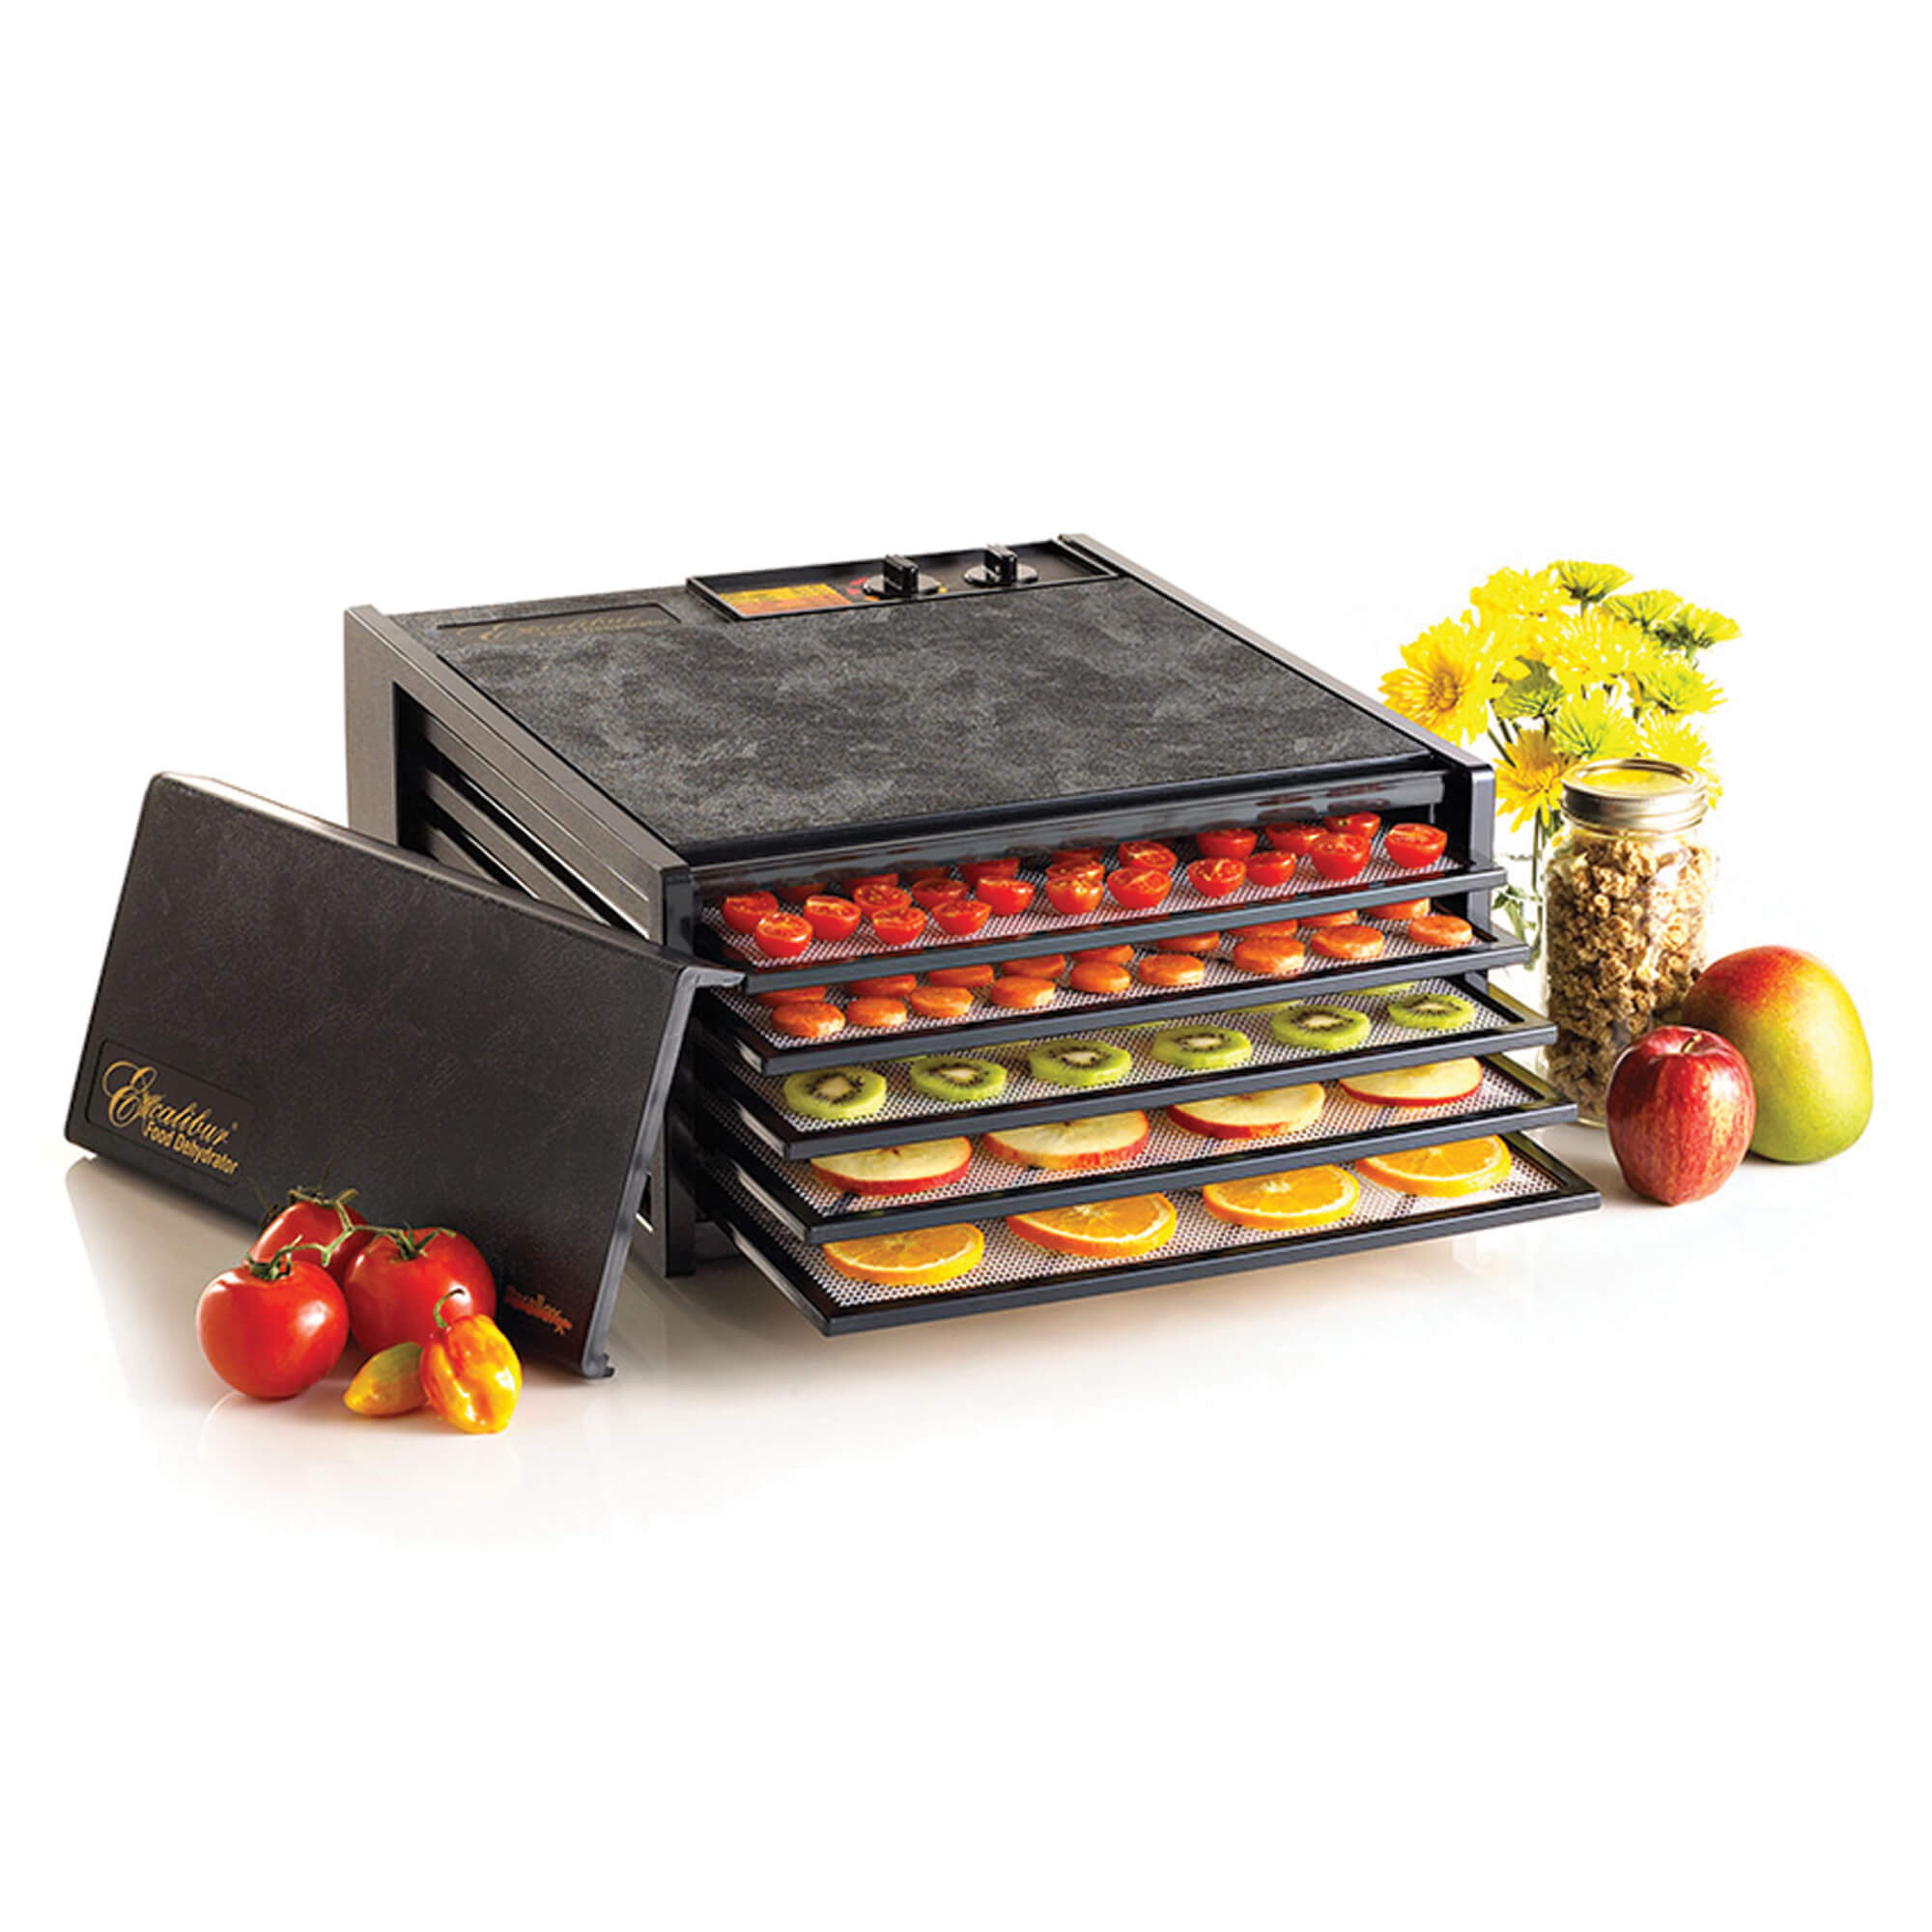 Excalibur 4526TB 5 tray dehydrator with door propped to the side and food on the trays.